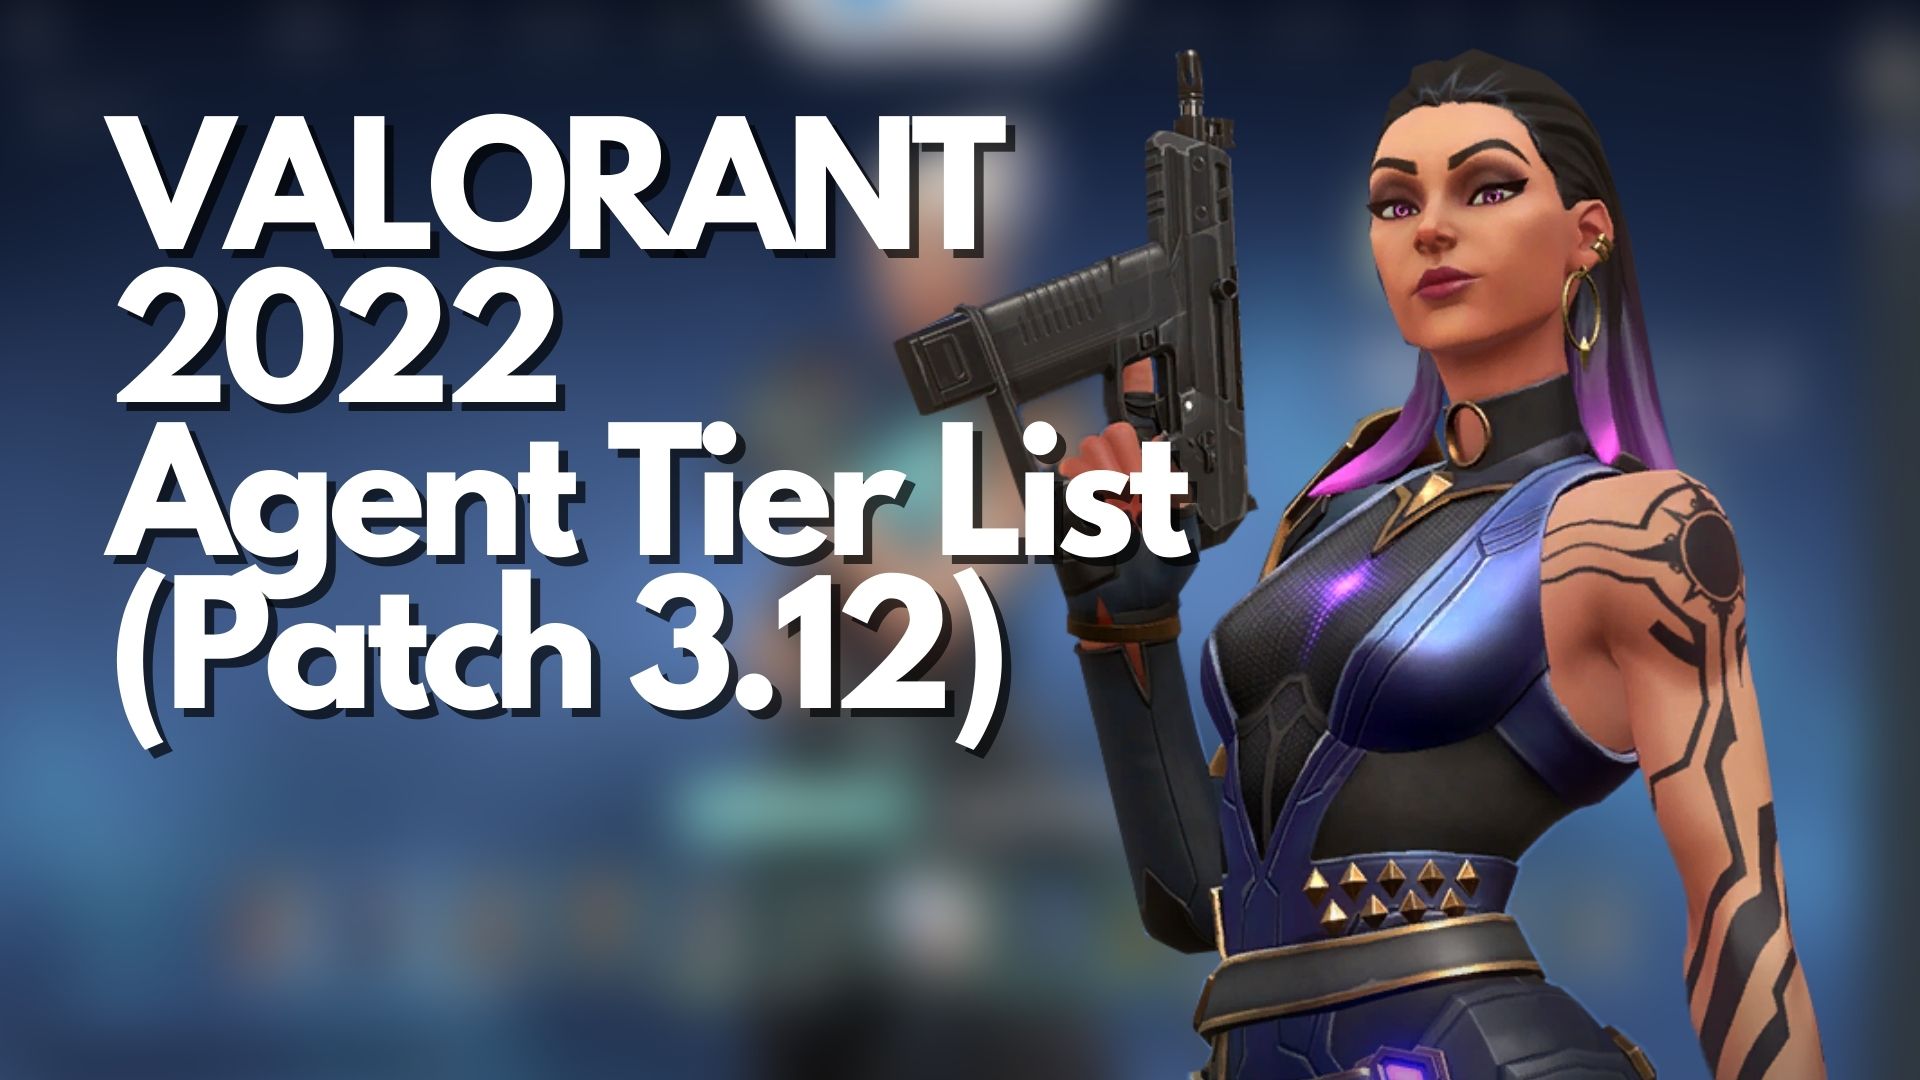 VALORANT: New Year 2022 Agent Tier List (Patch 3.12)